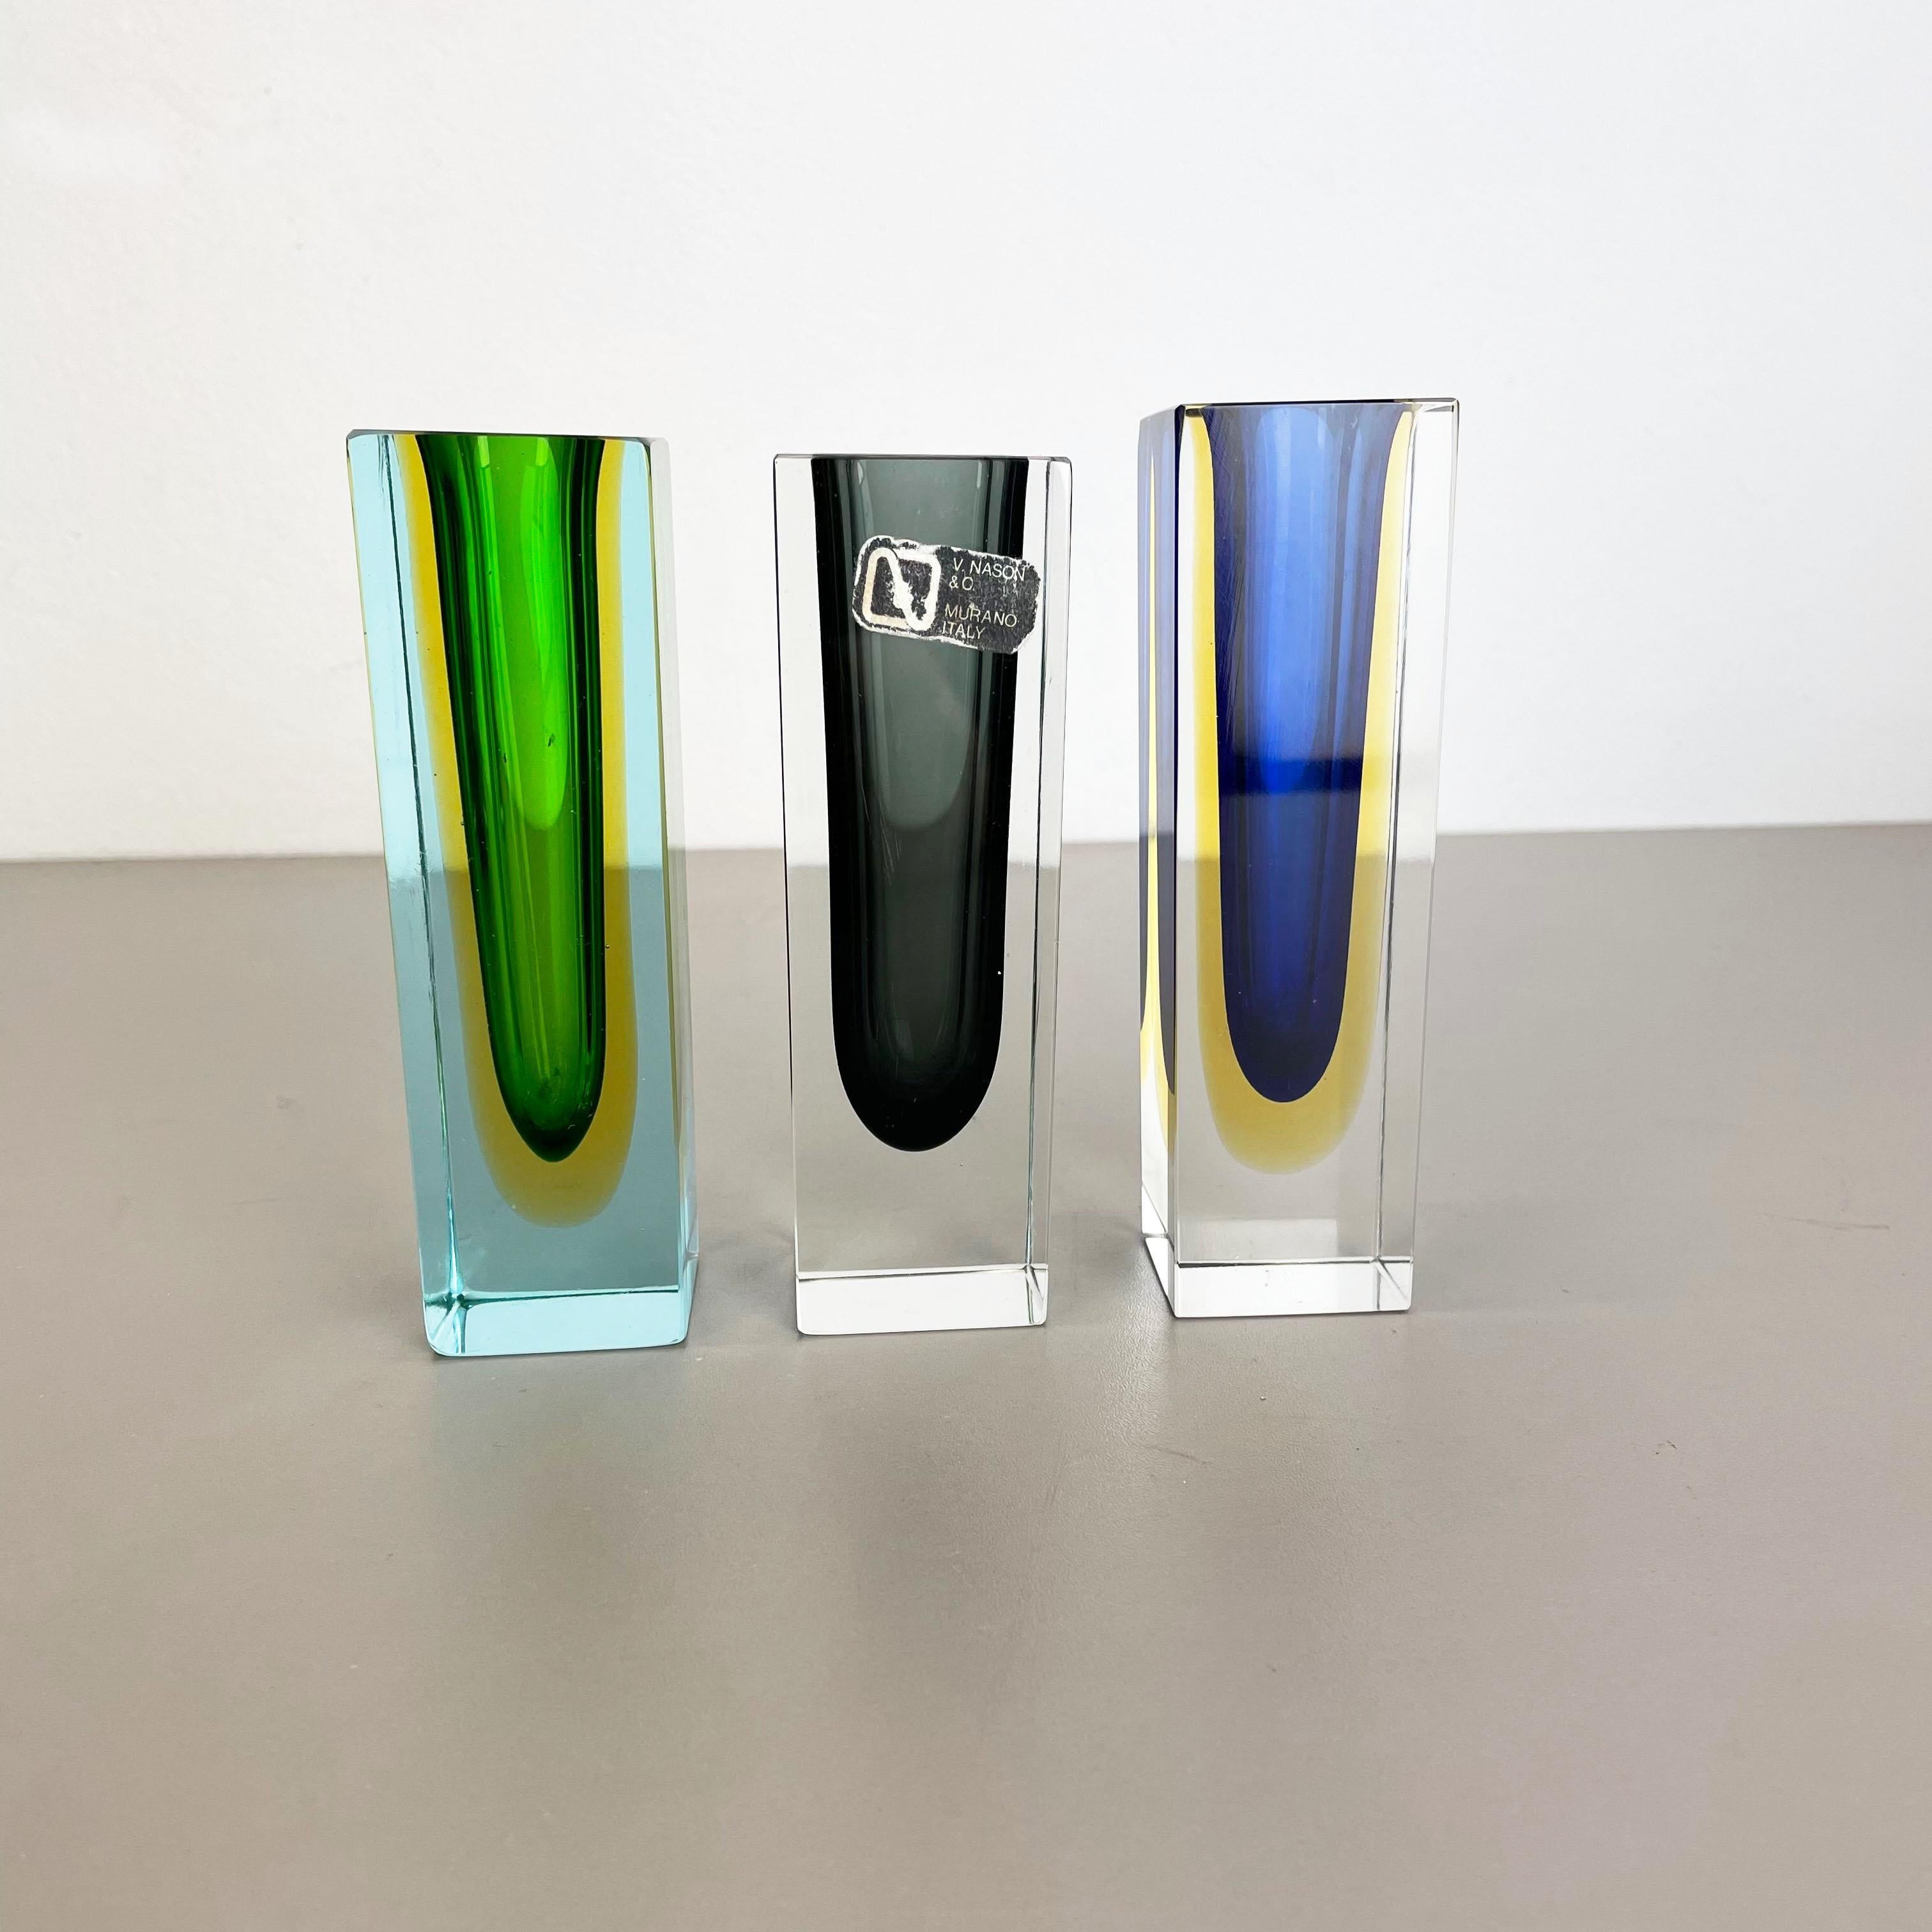 Article:

Murano glass vase set of 3


Producer:

V. Nason and C. ( one vase still features the original producer label)


Origin:

Murano, Italy


Decade:

1970s

These original set of 3 glass vases was produced in the 1970s in